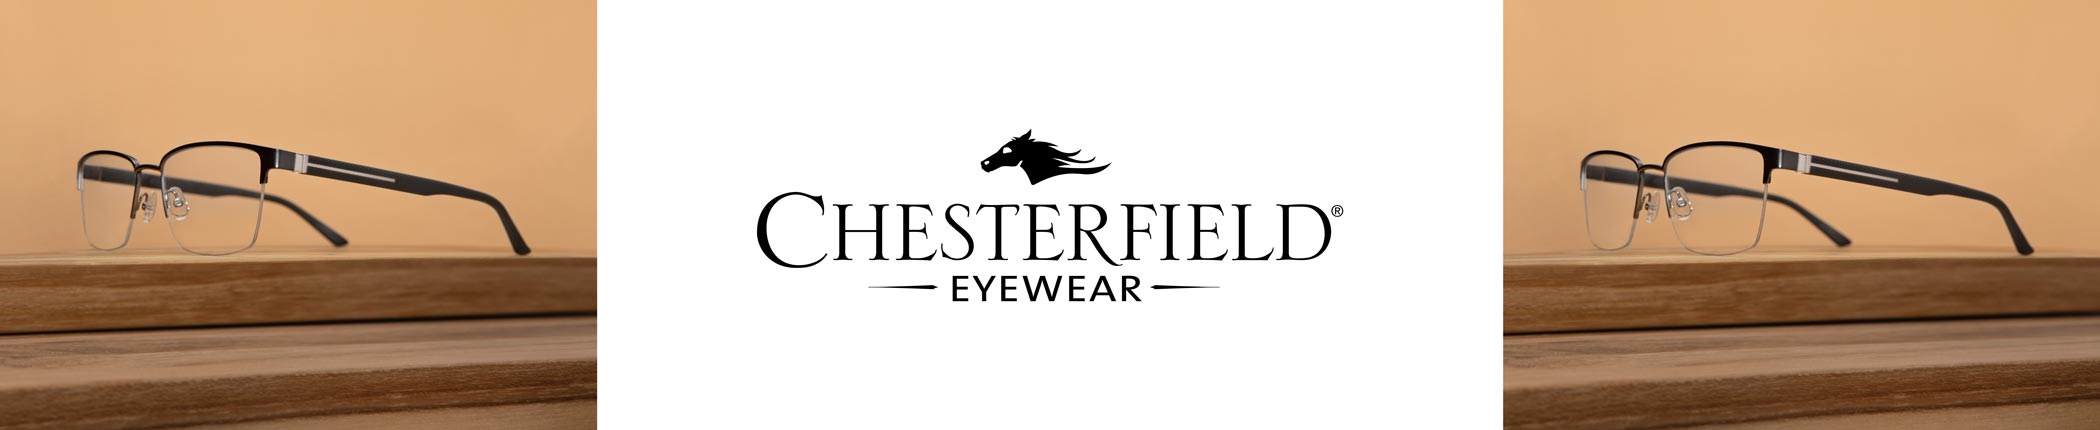 Shop Chesterfield Eyeglasses & Sunglasses - featuring CH 87XL